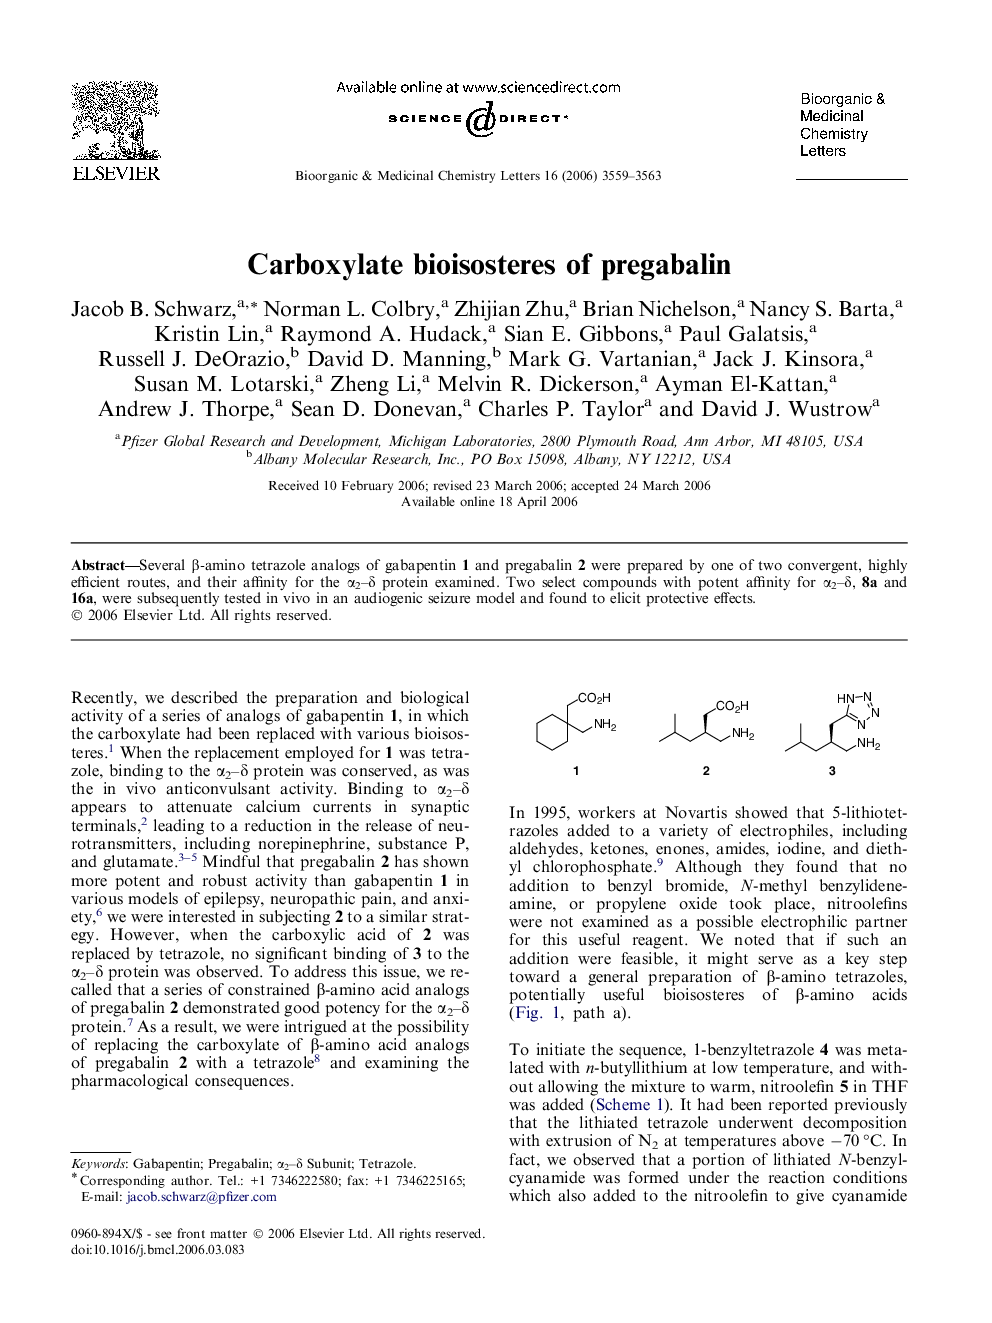 Carboxylate bioisosteres of pregabalin